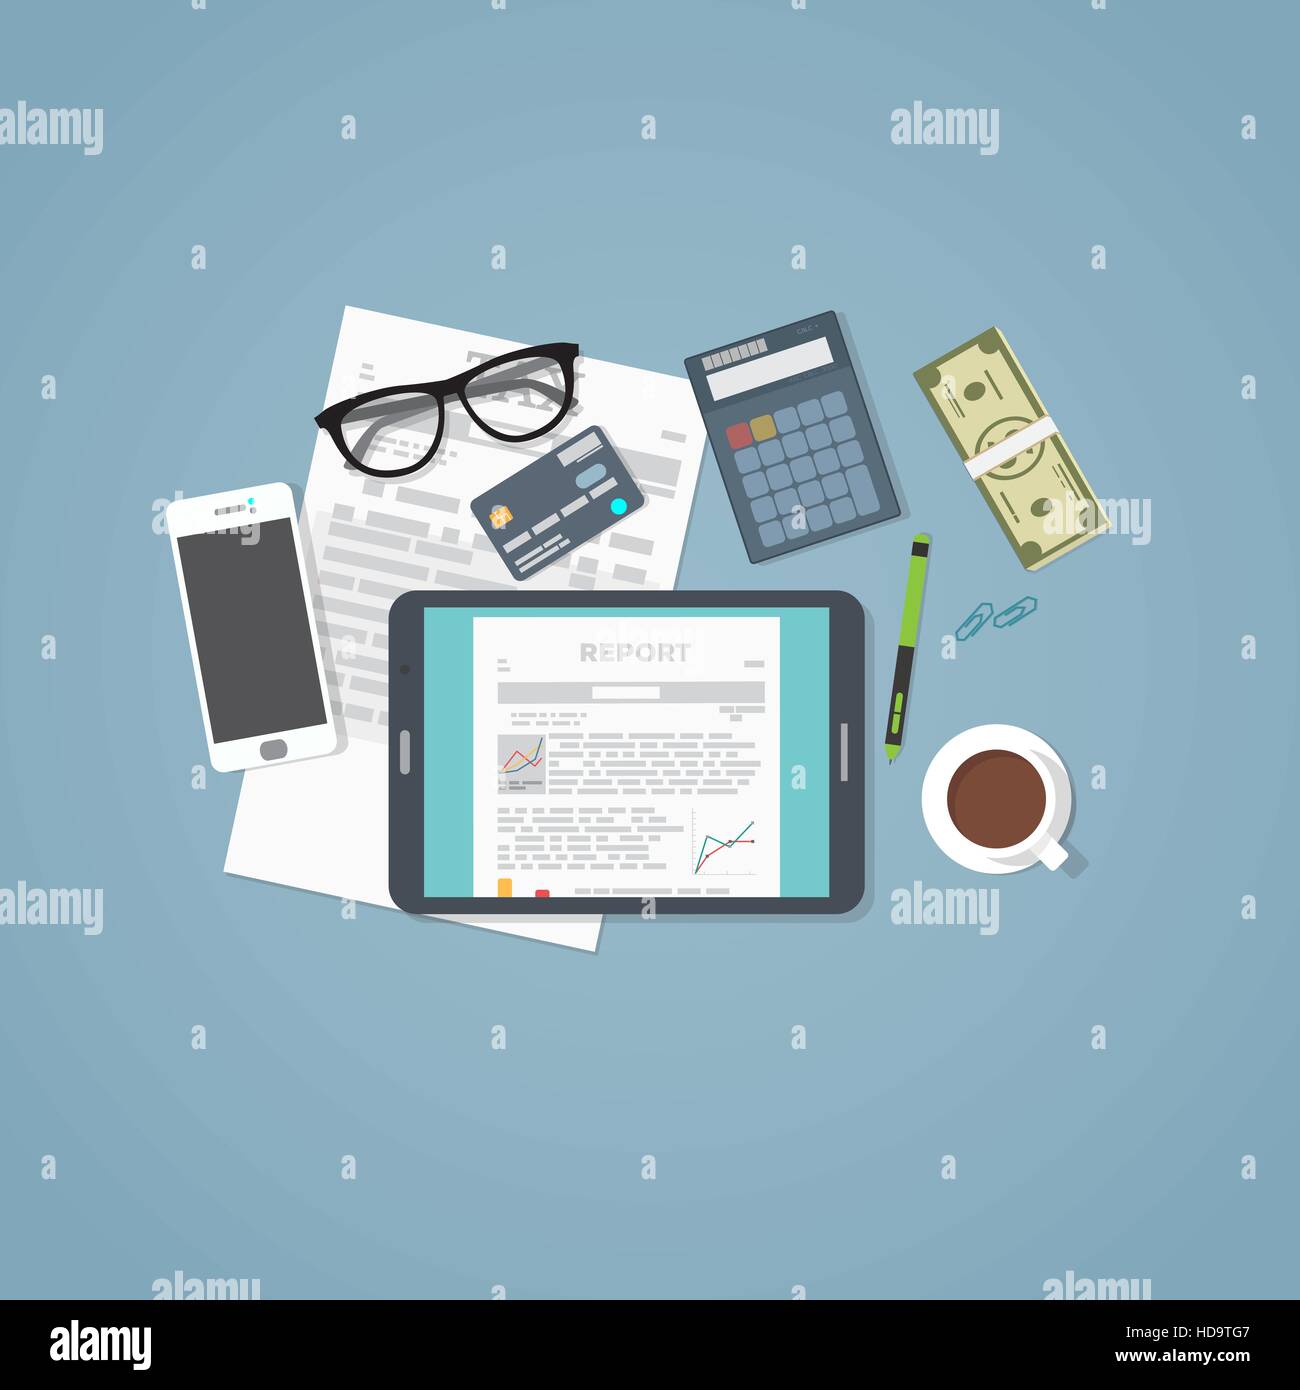 Business concept flat illustration. Tablet and business staff, phone papers and report documets with chart and financial graph information Stock Vector